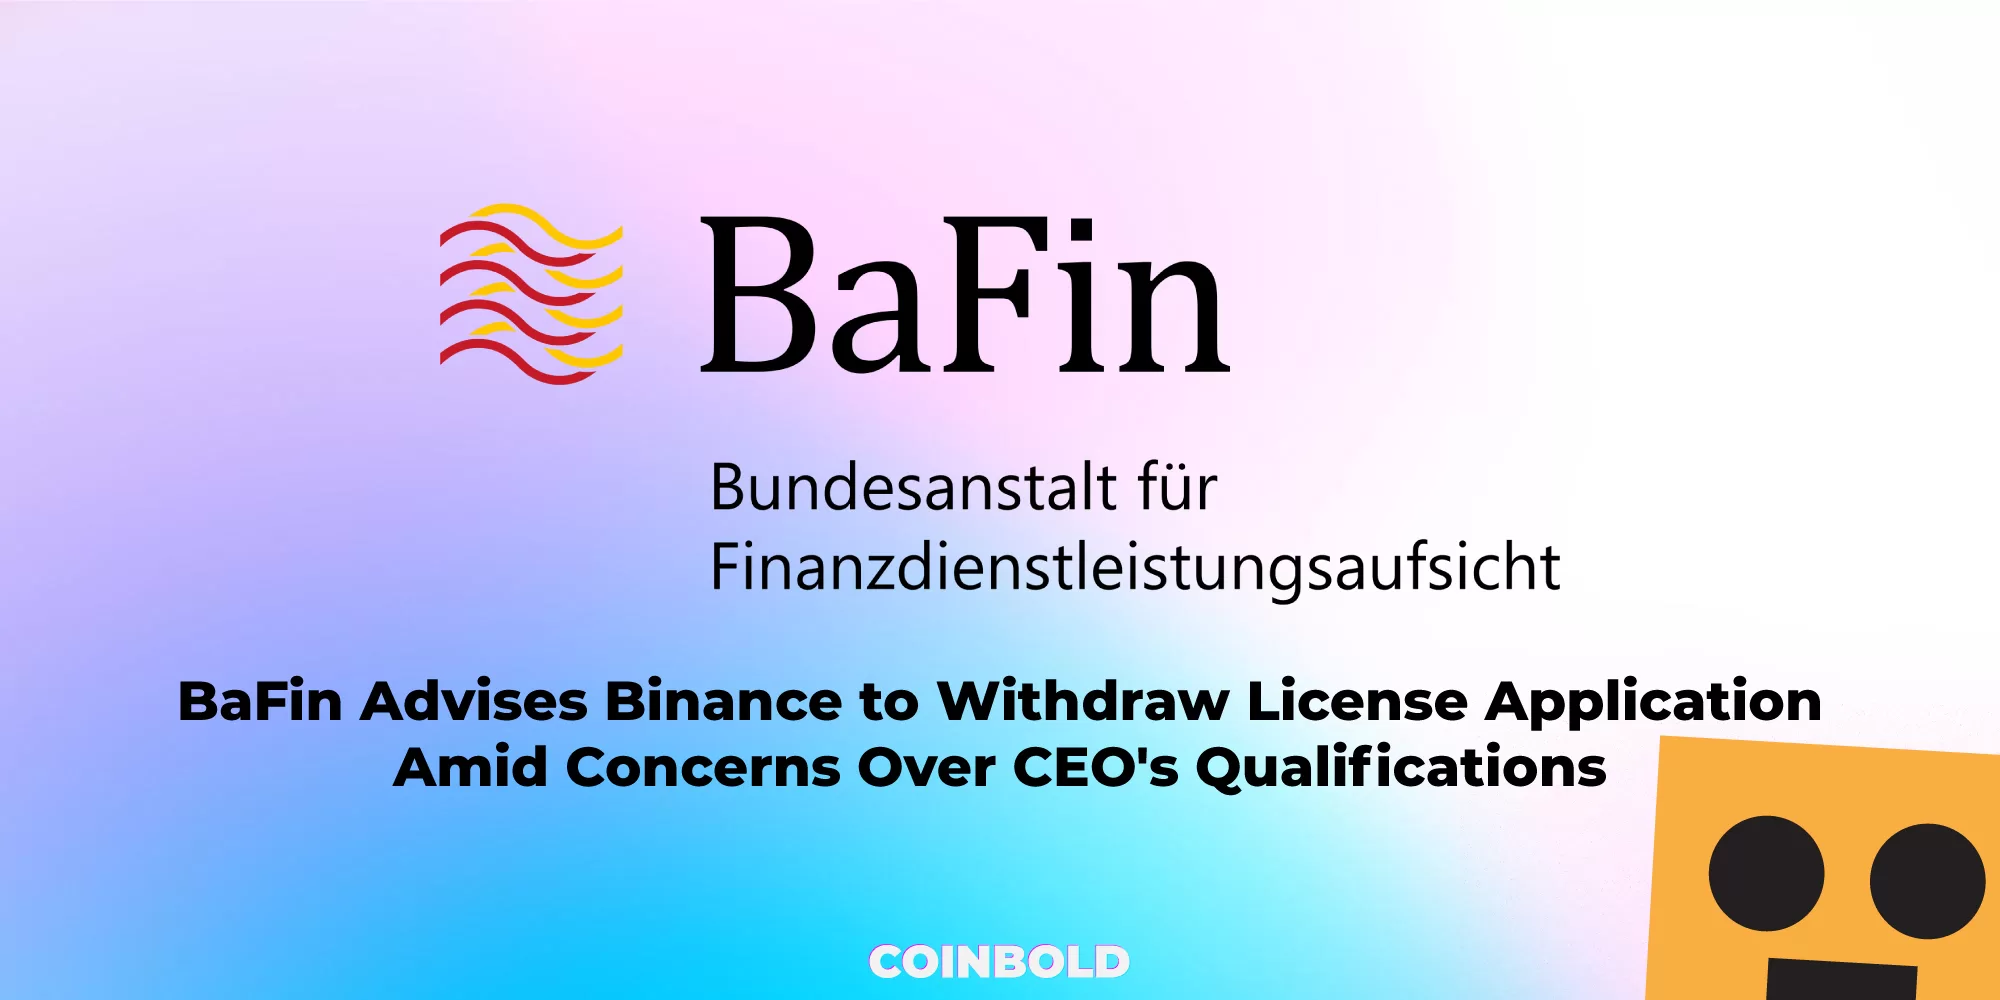 BaFin Advises Binance to Withdraw License Application Amid Concerns Over CEO's Qualifications